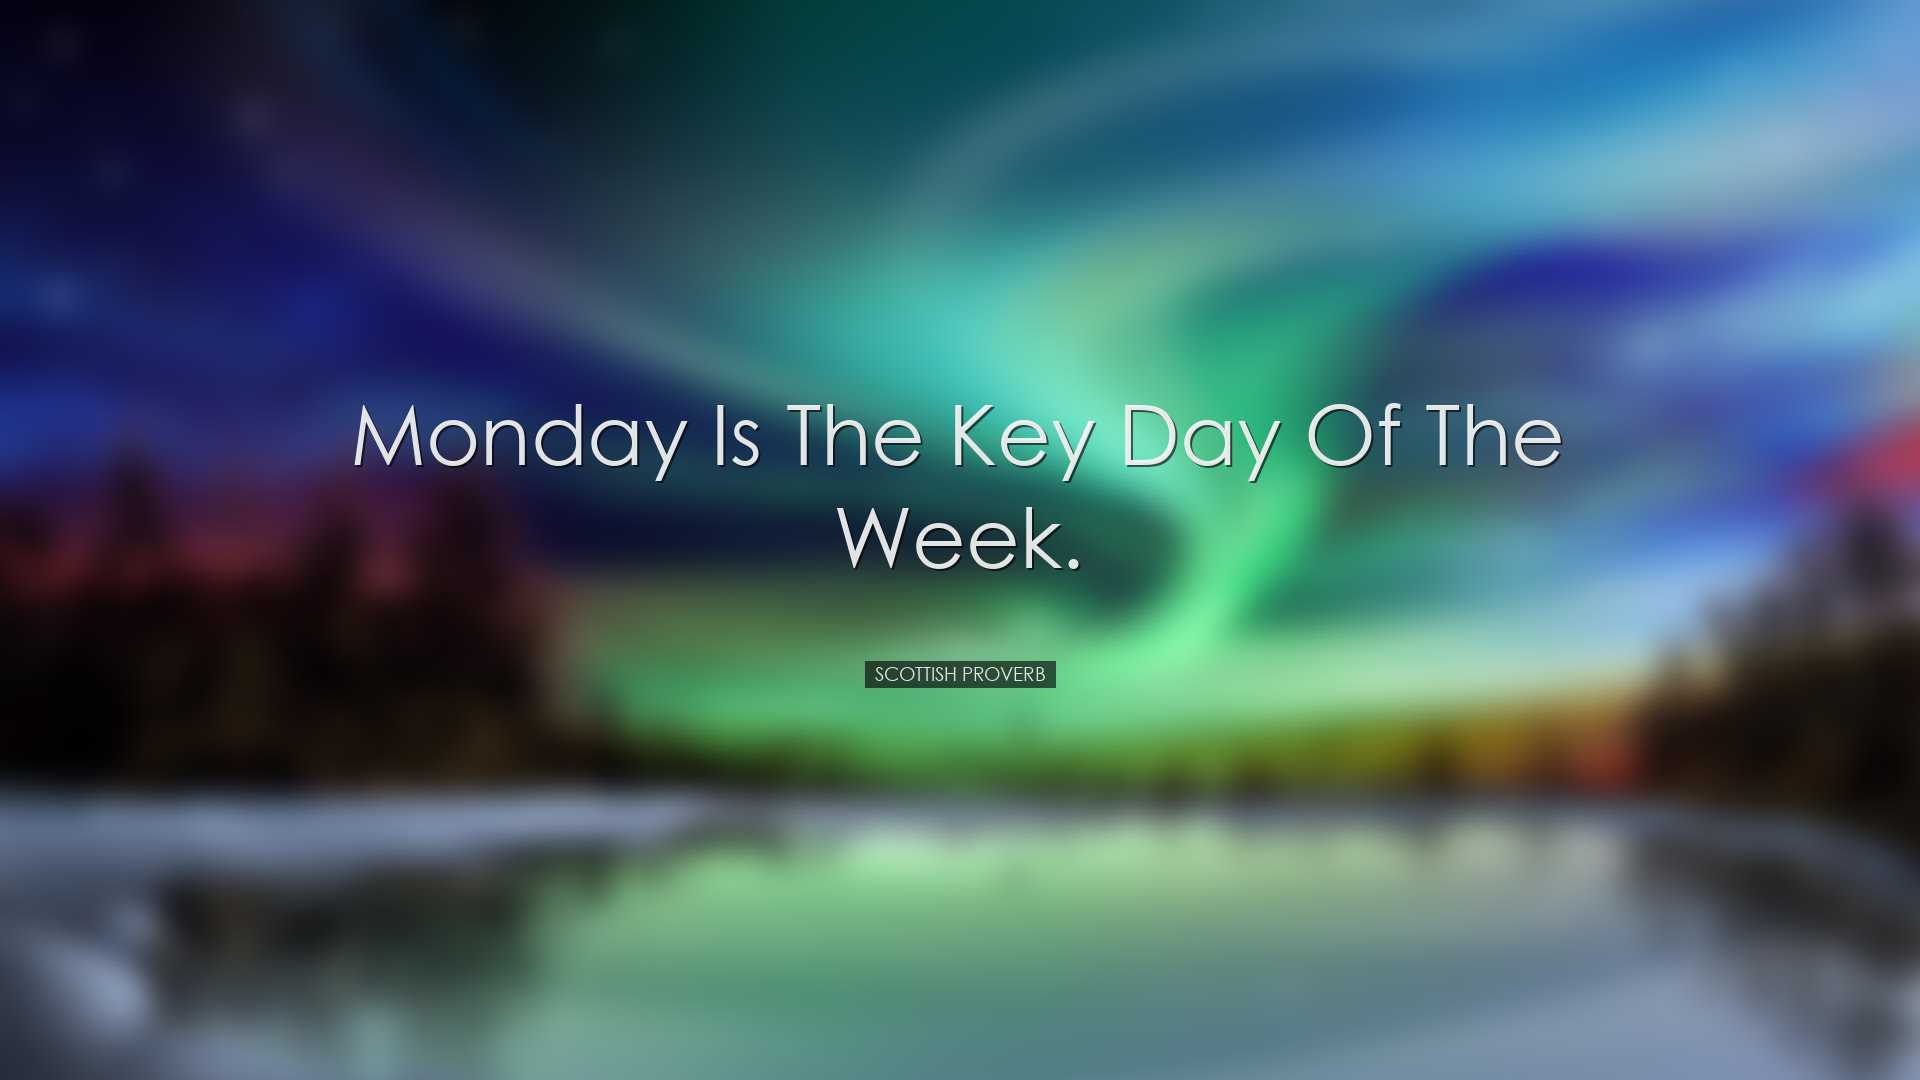 Monday is the key day of the week. - Scottish Proverb